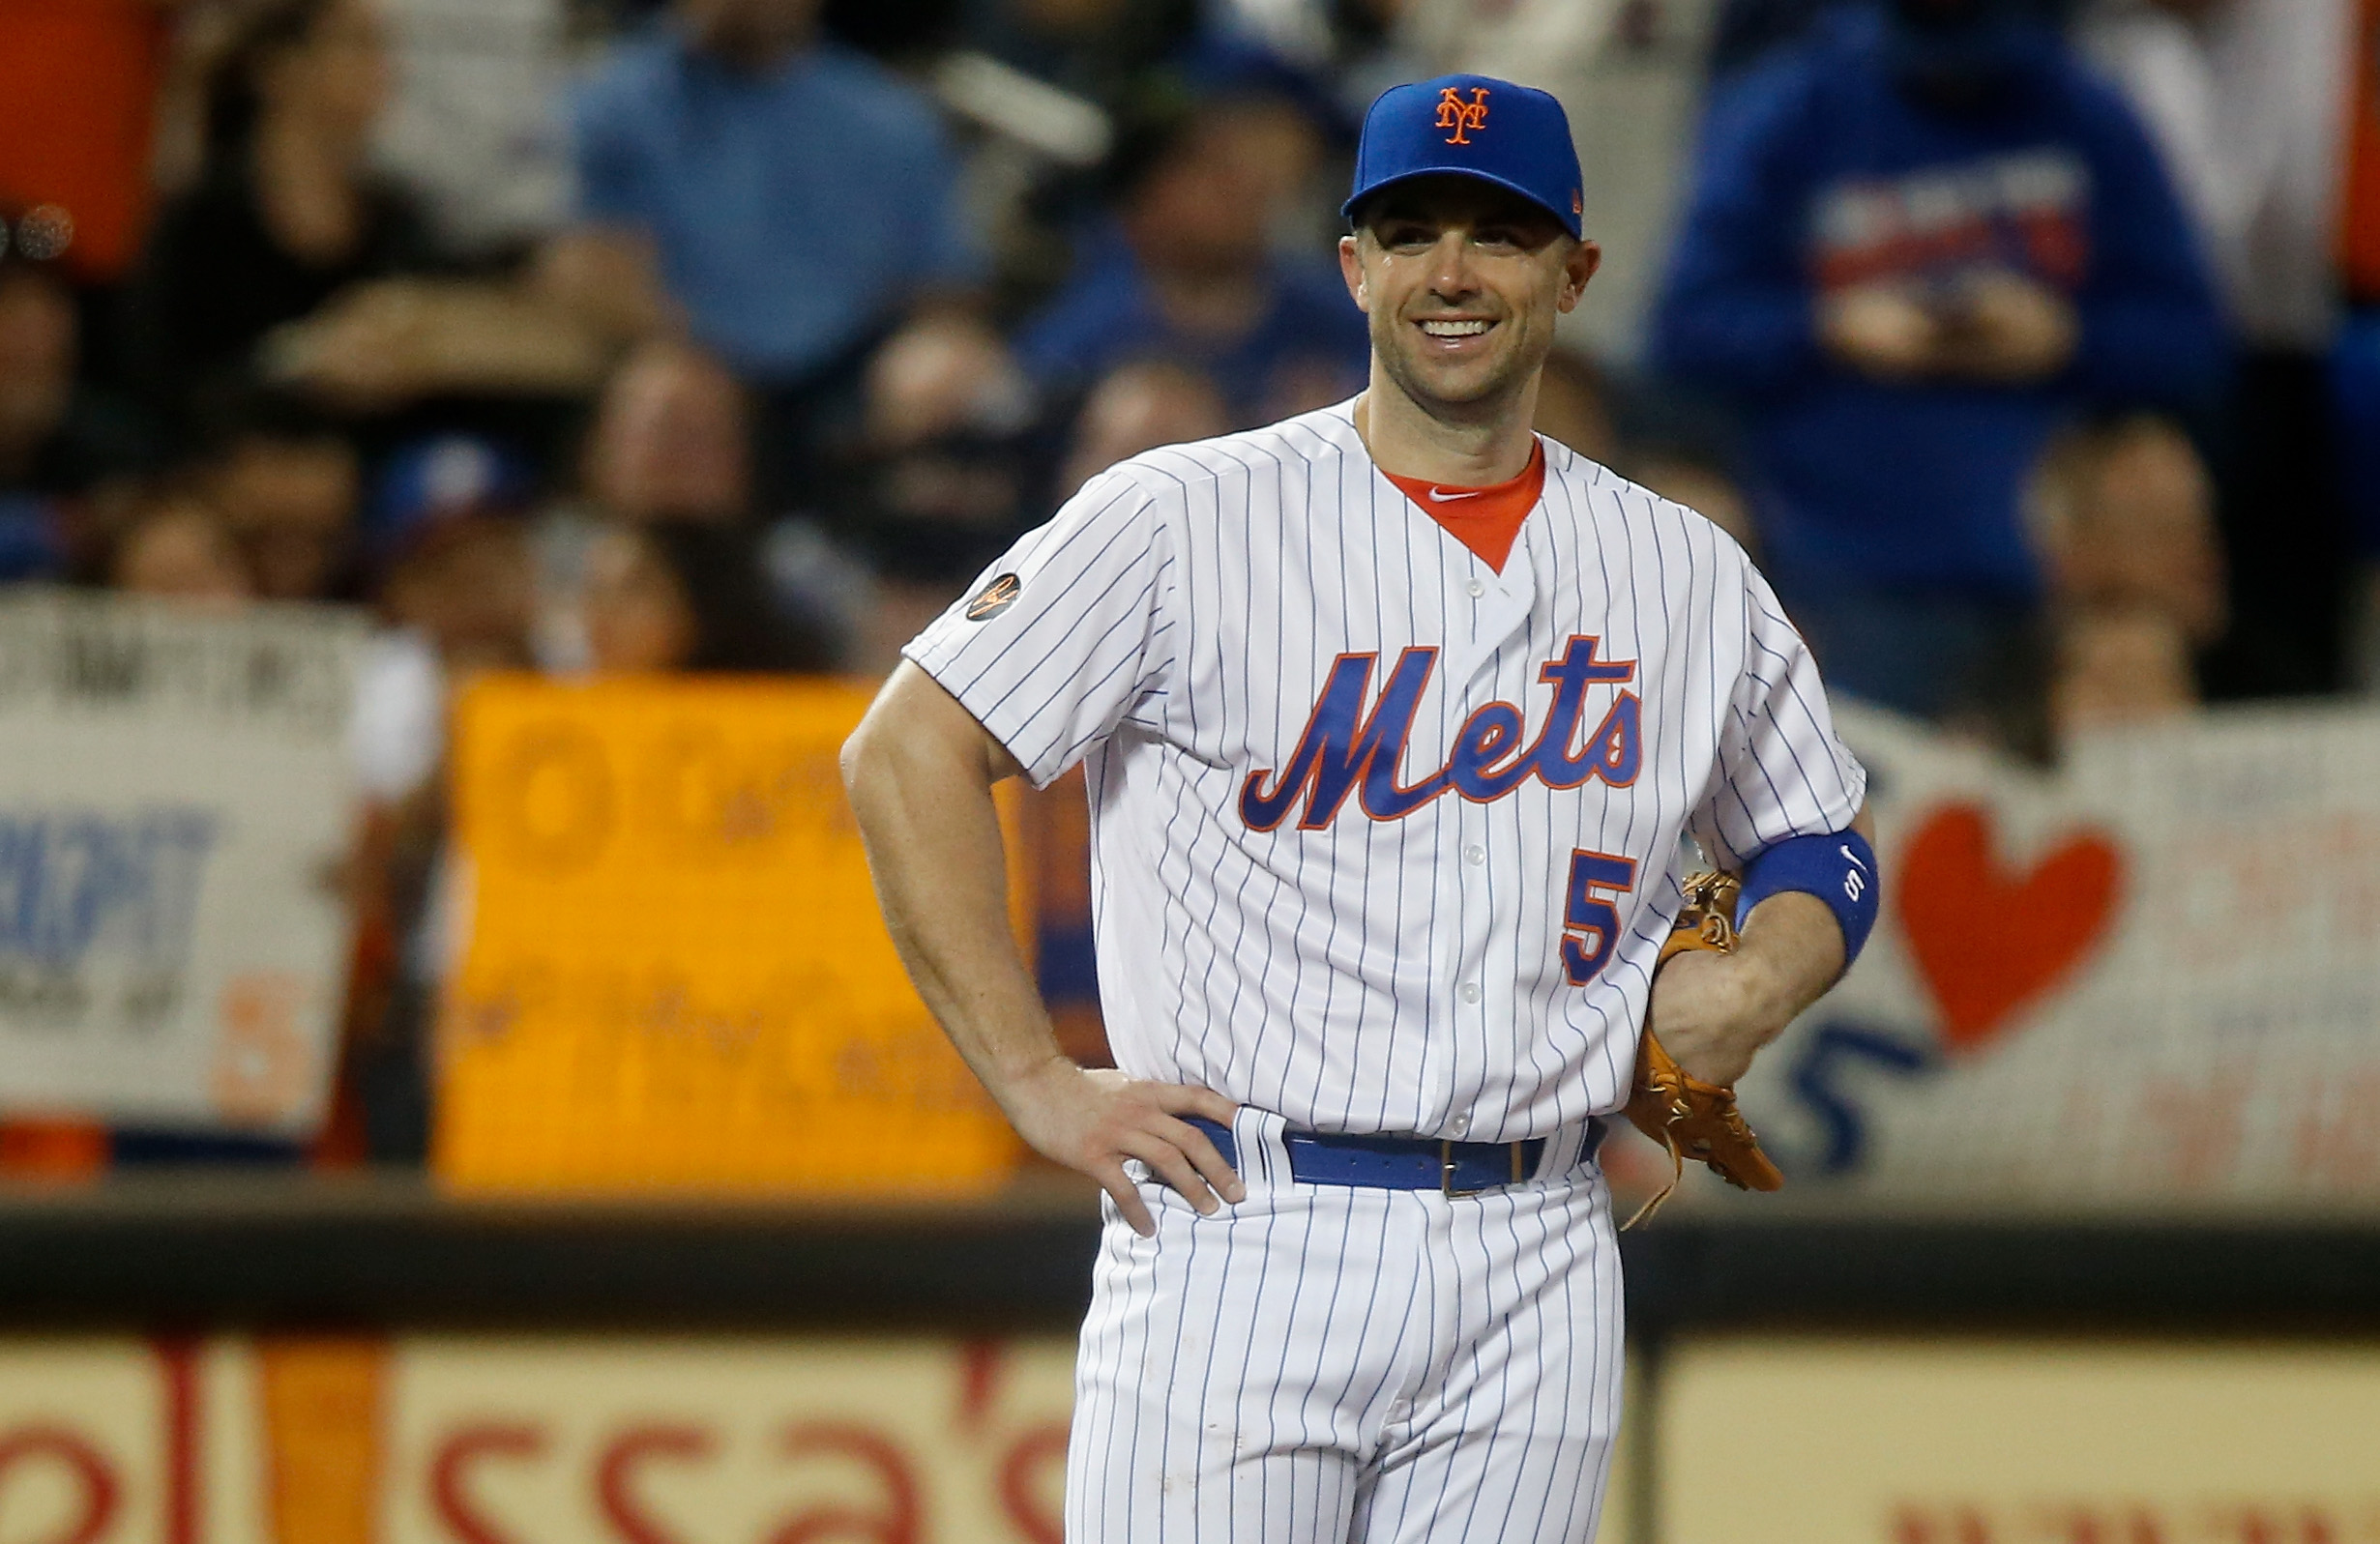 WATCH: David Wright's game-winning hit to give Mets win in NLDS